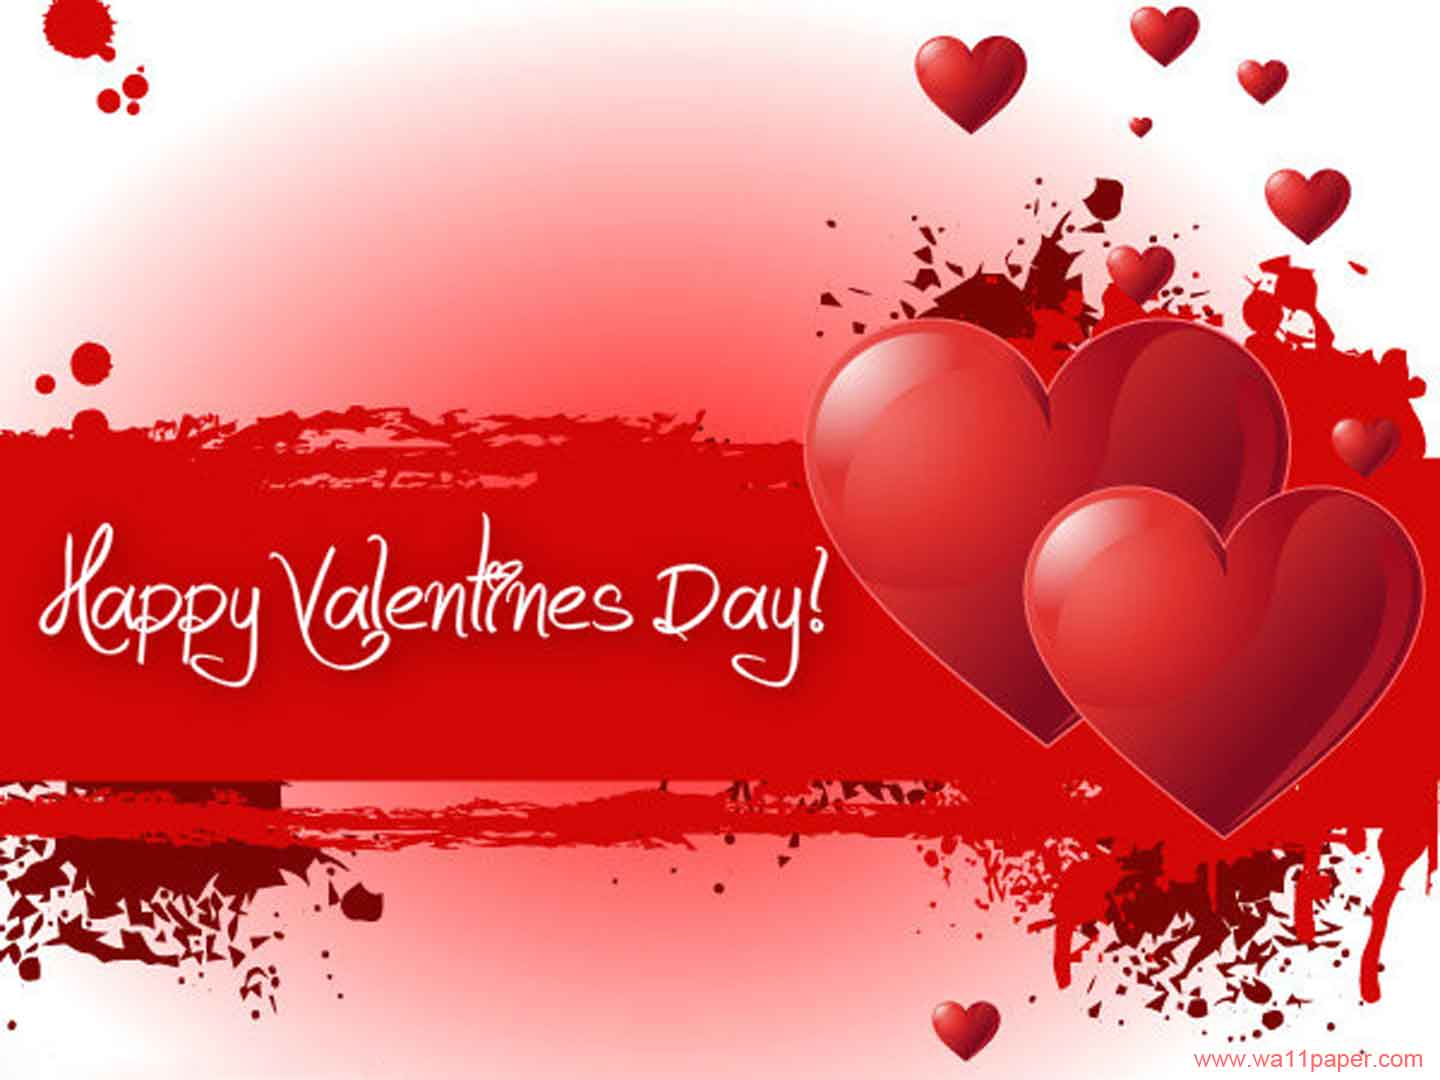 Happy Valentines Day Wallpaper Picture